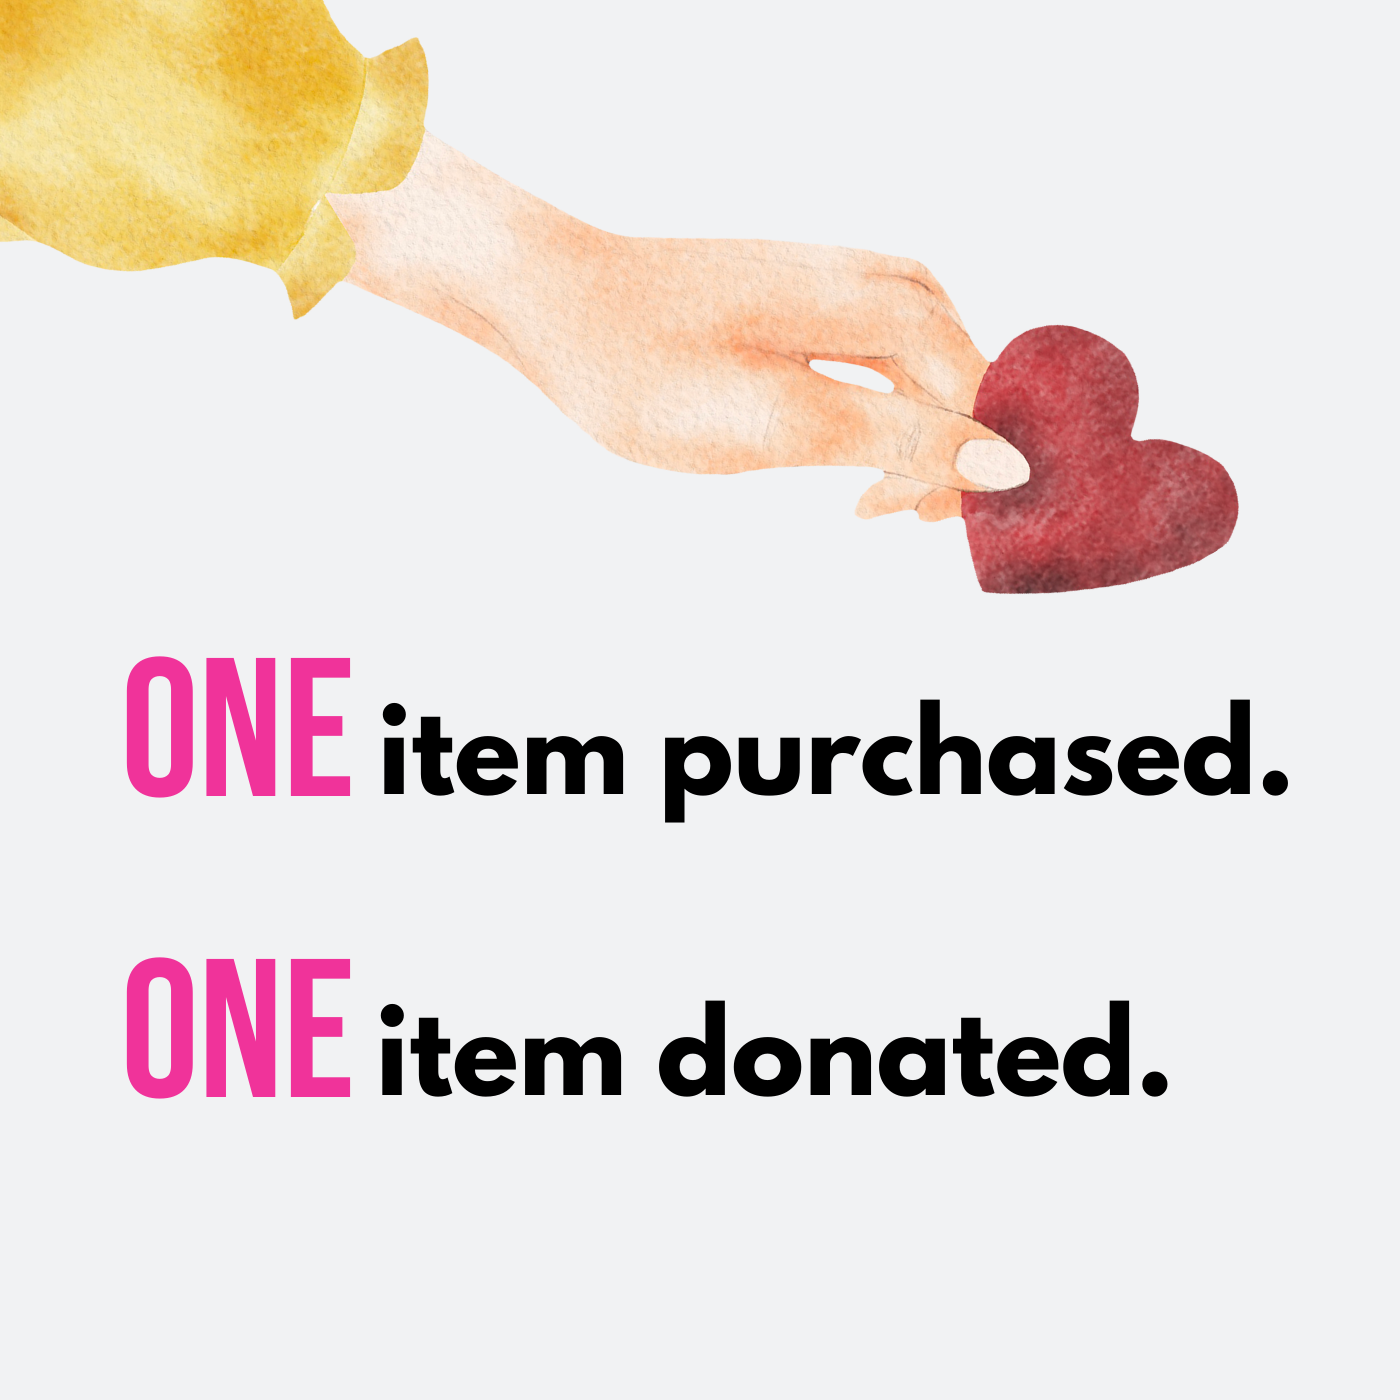 Make a purchase. Make a difference. When ONE item is purchased, ONE item is donated.